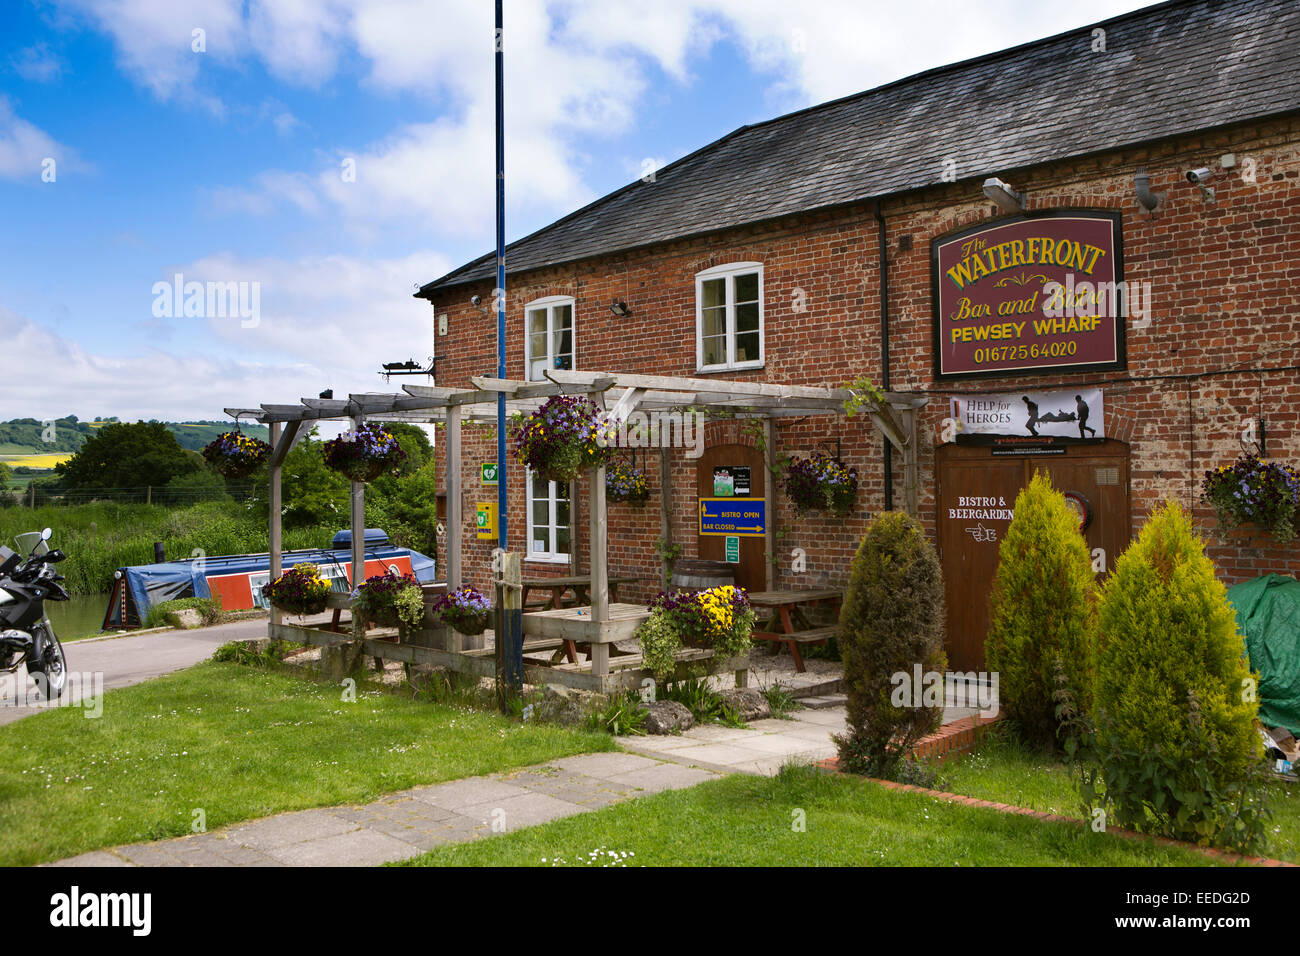 Regno Unito, Inghilterra, Wiltshire, Pewsey Wharf, Waterfront Bar e Bistro accanto a Kennet and Avon Canal Foto Stock